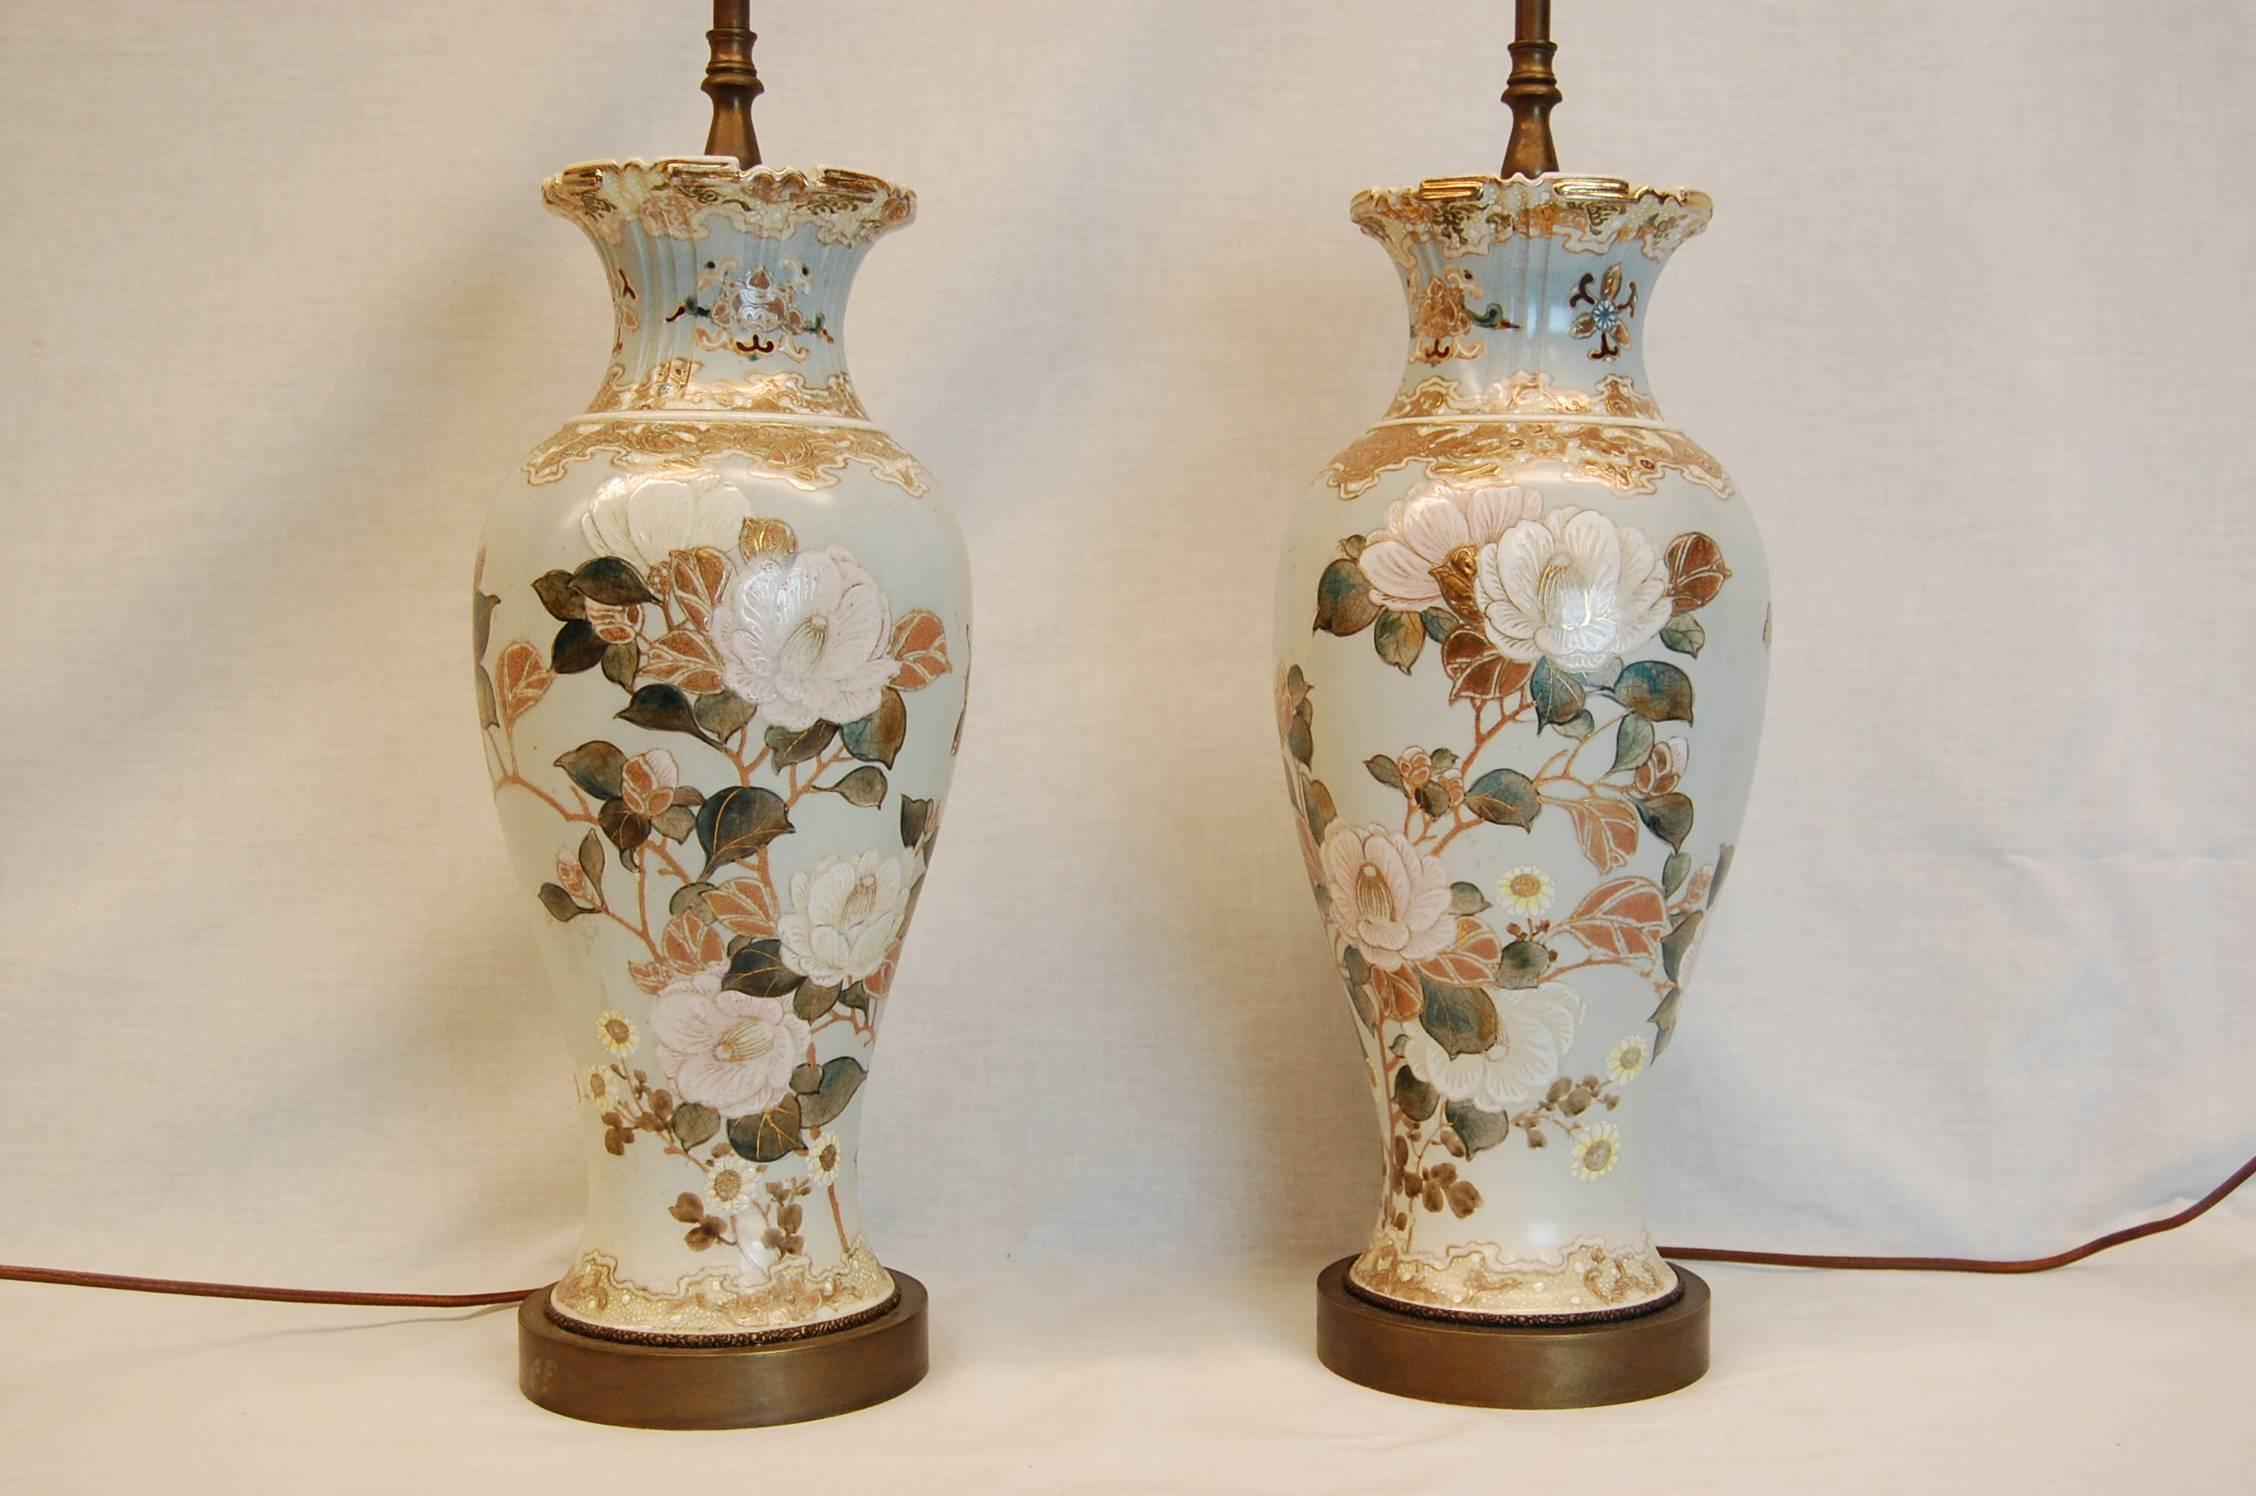 Pair of lamps with beautiful Magnolia blossoms decorations on a pale blue background. The urns themselves measure 15 1/4 inches tall. Excellent condition.